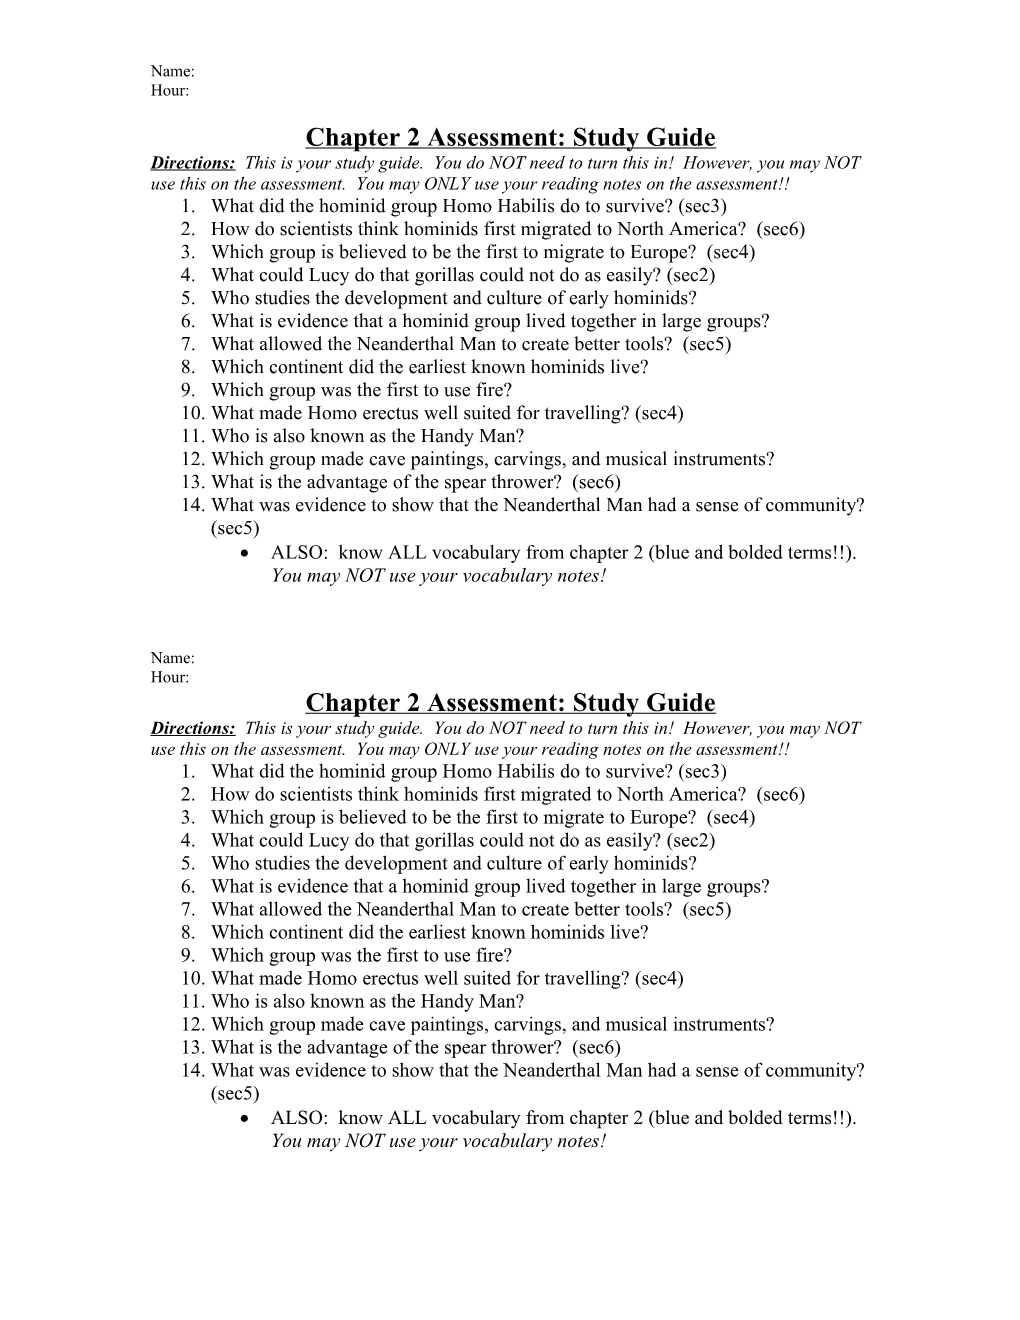 Chapter 2 Assessment: Study Guide